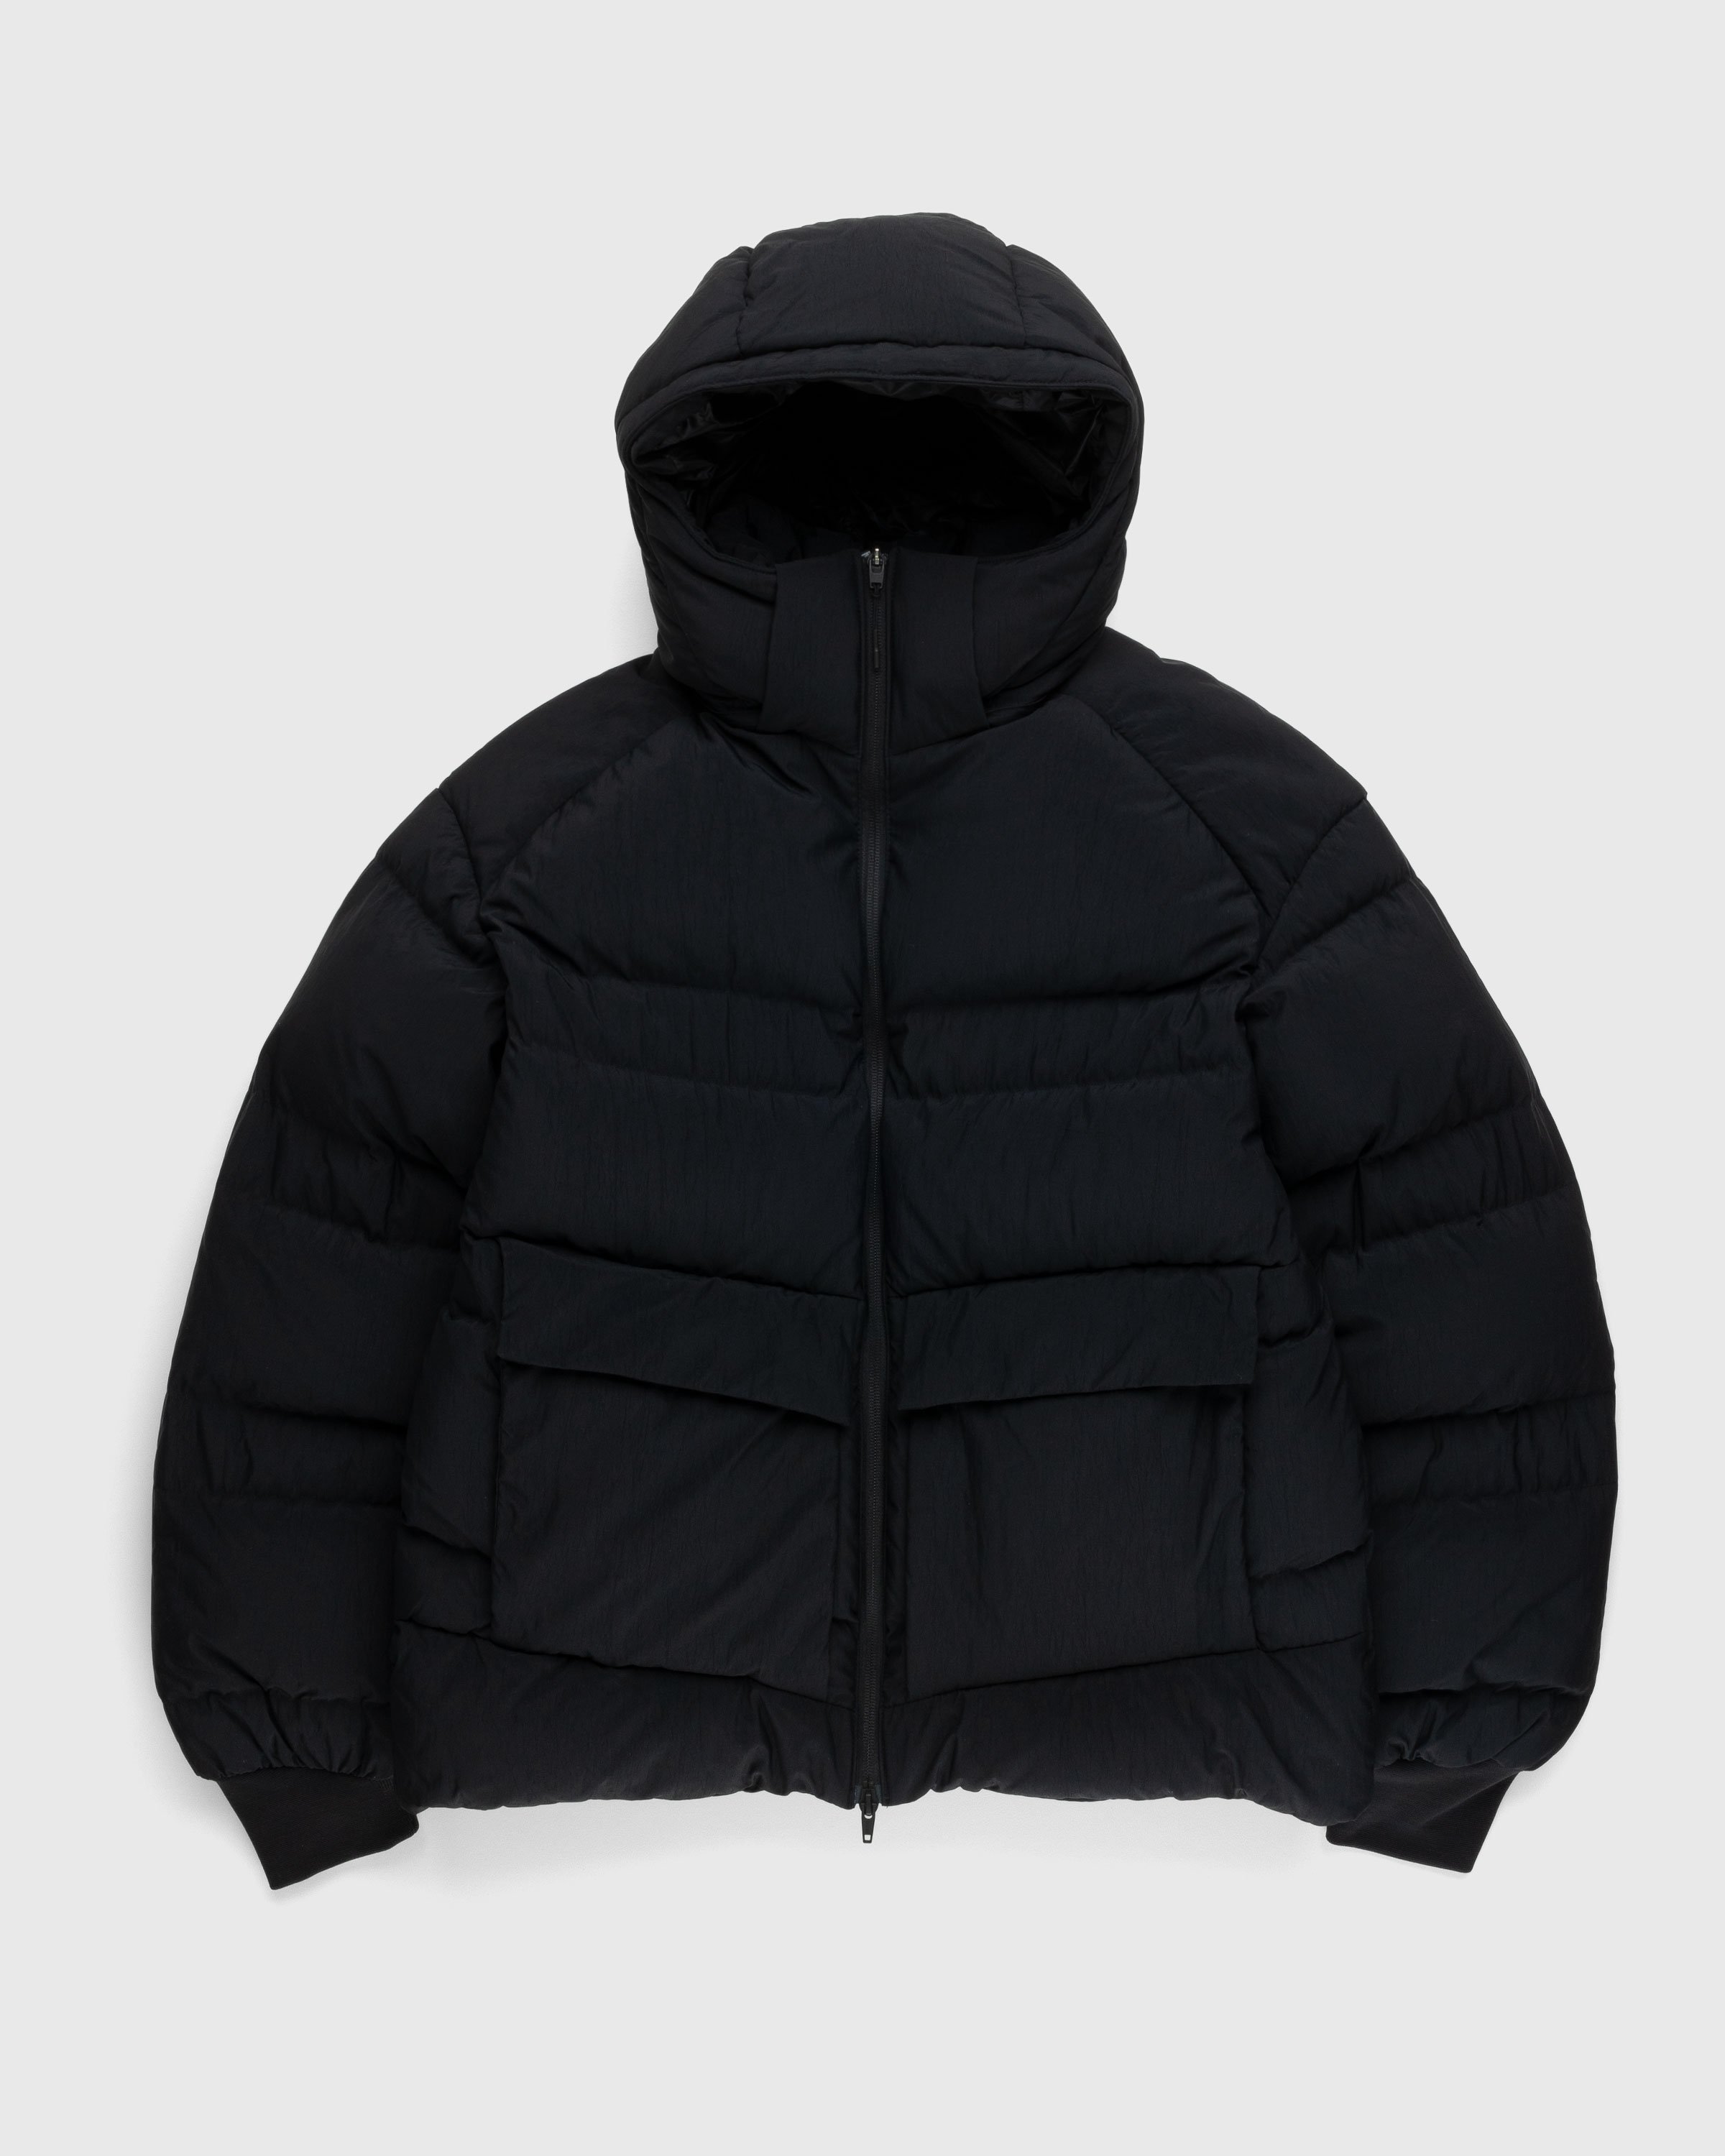 Y-3 - CL Puffer Jacket - Clothing - Black - Image 1